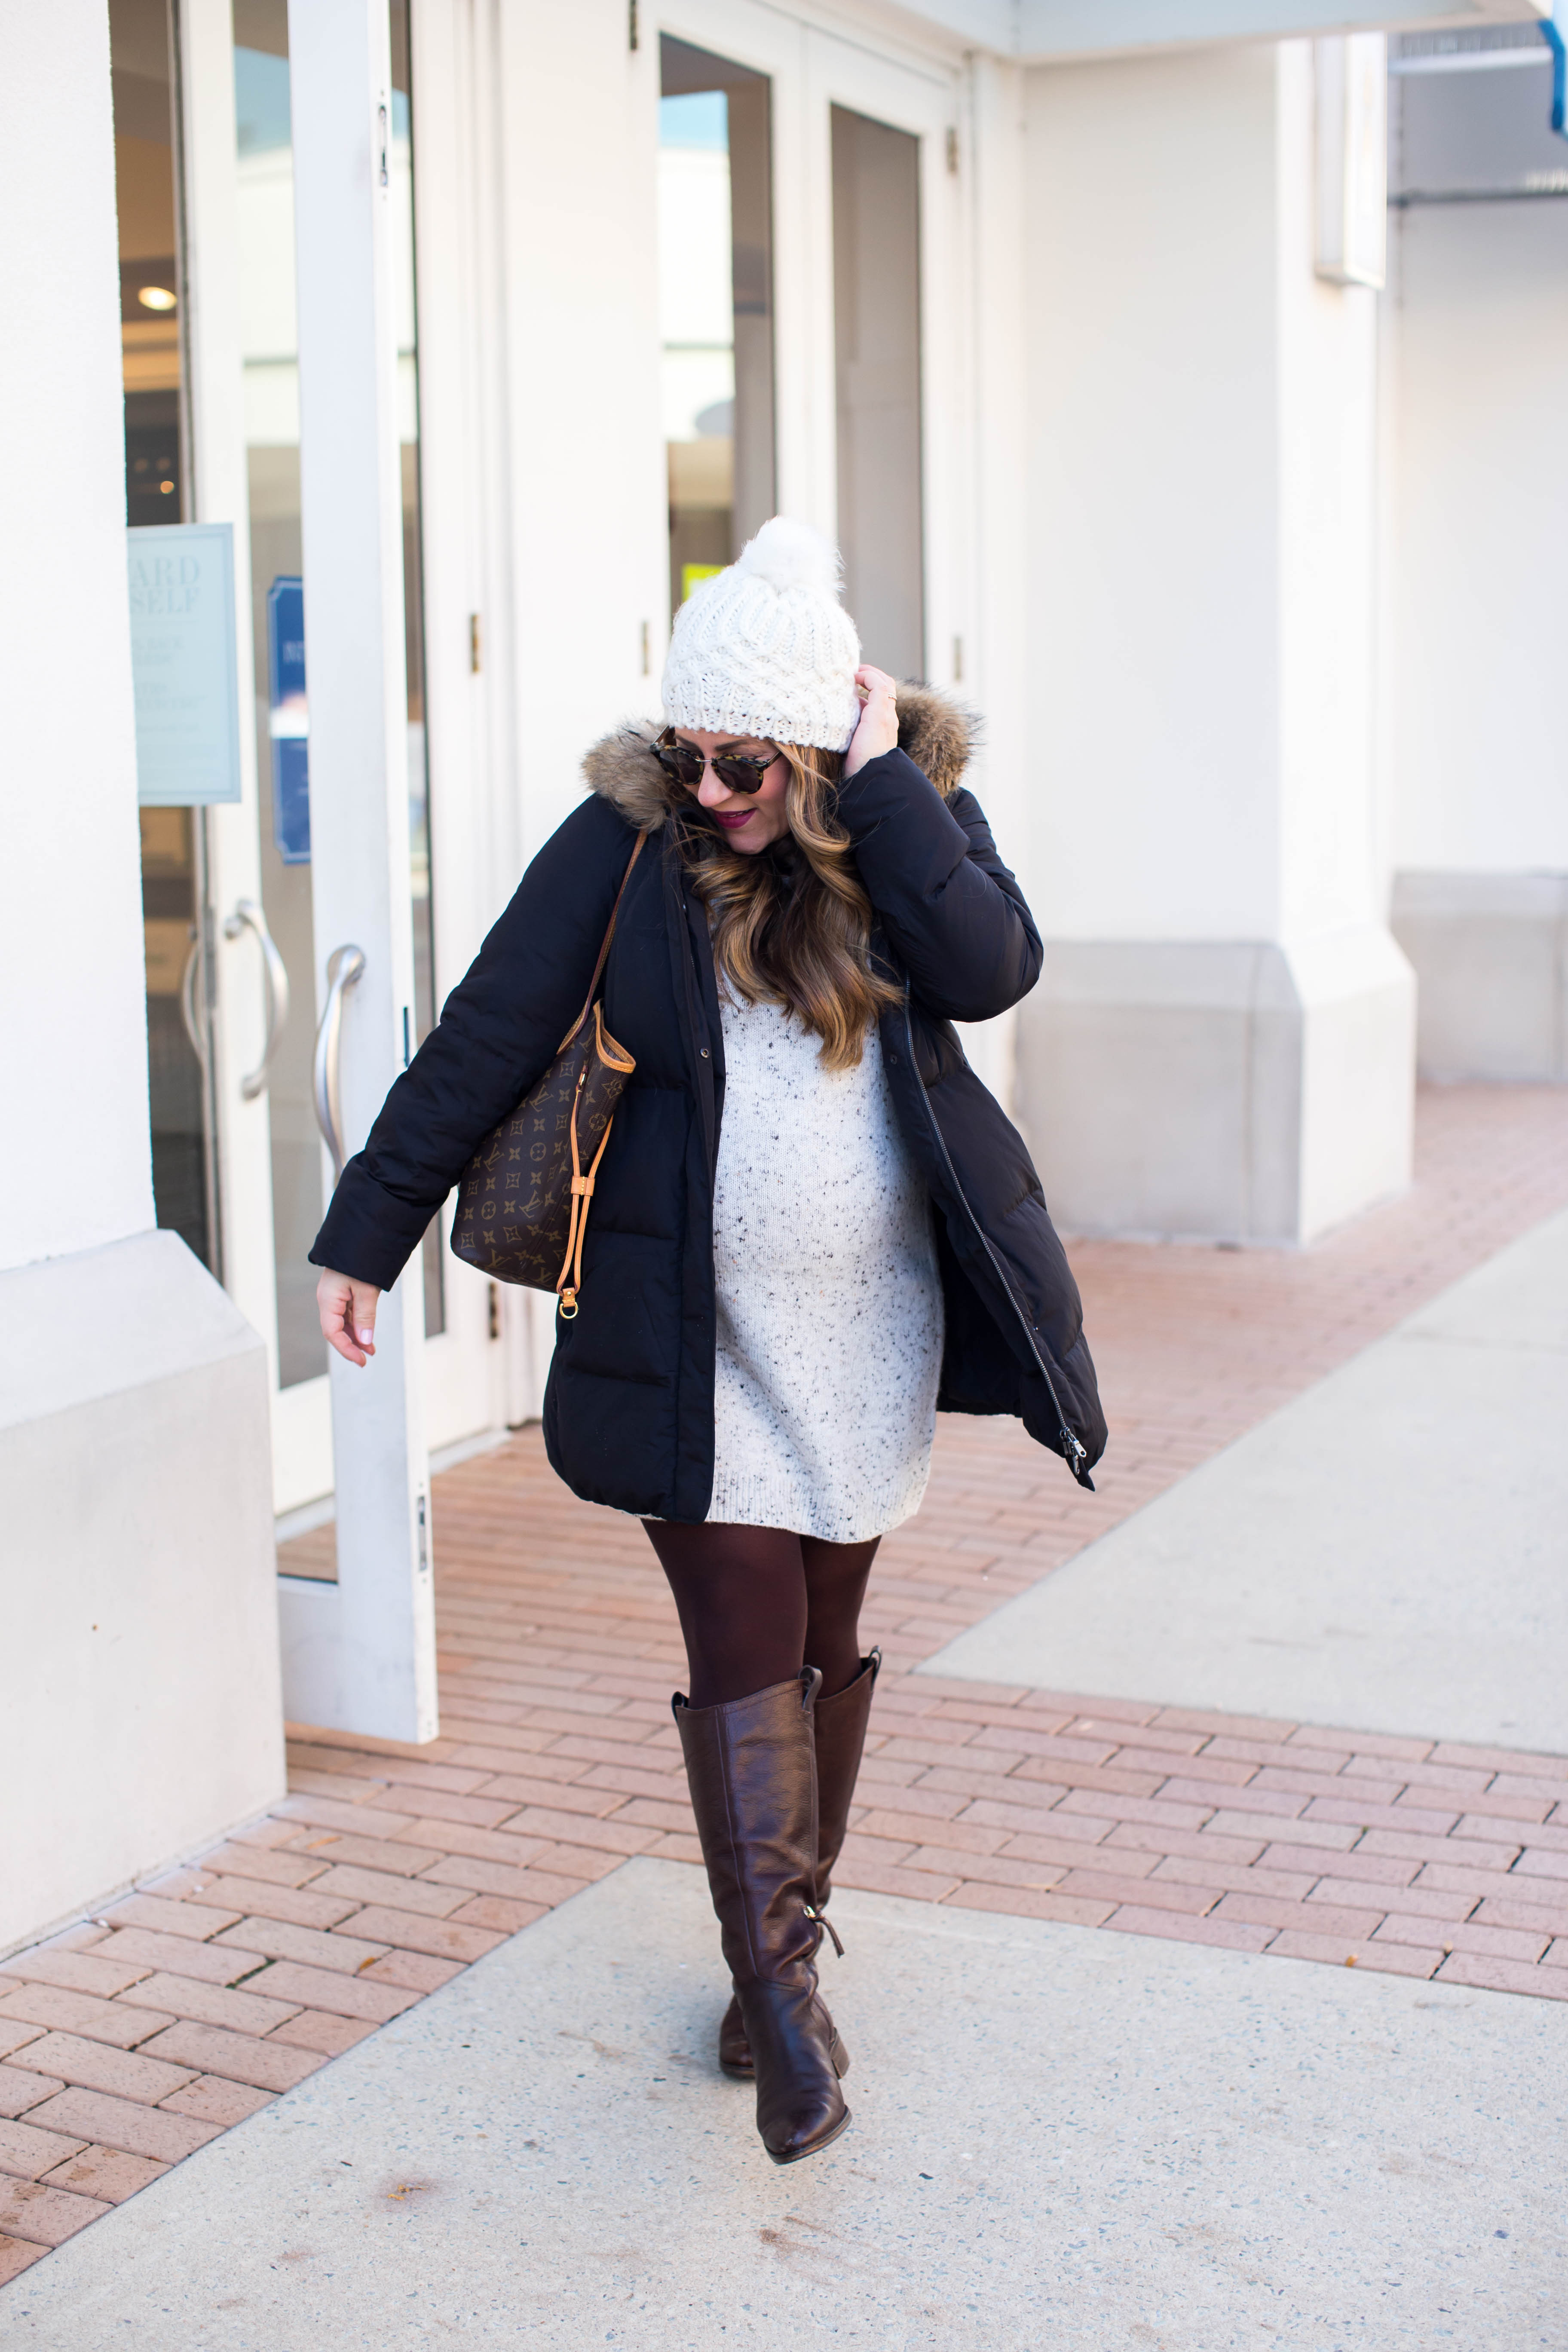 My Fave Winter Wardrobe Staples by North Carolina style blogger Coffee Beans and Bobby Pins